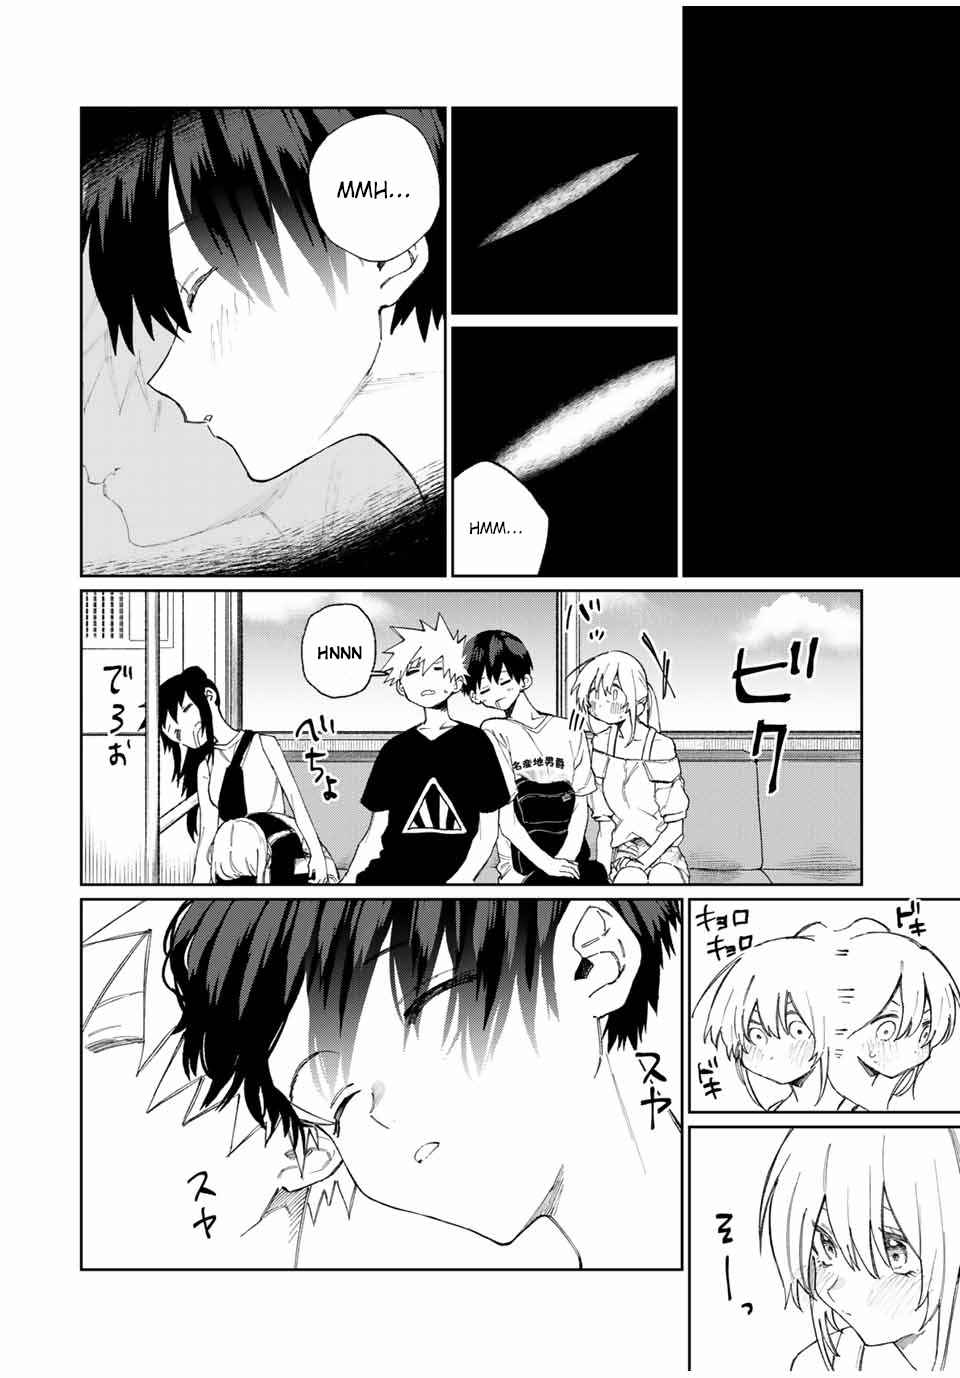 That Girl Is Not Just Cute Vol. 2 Ch. 31